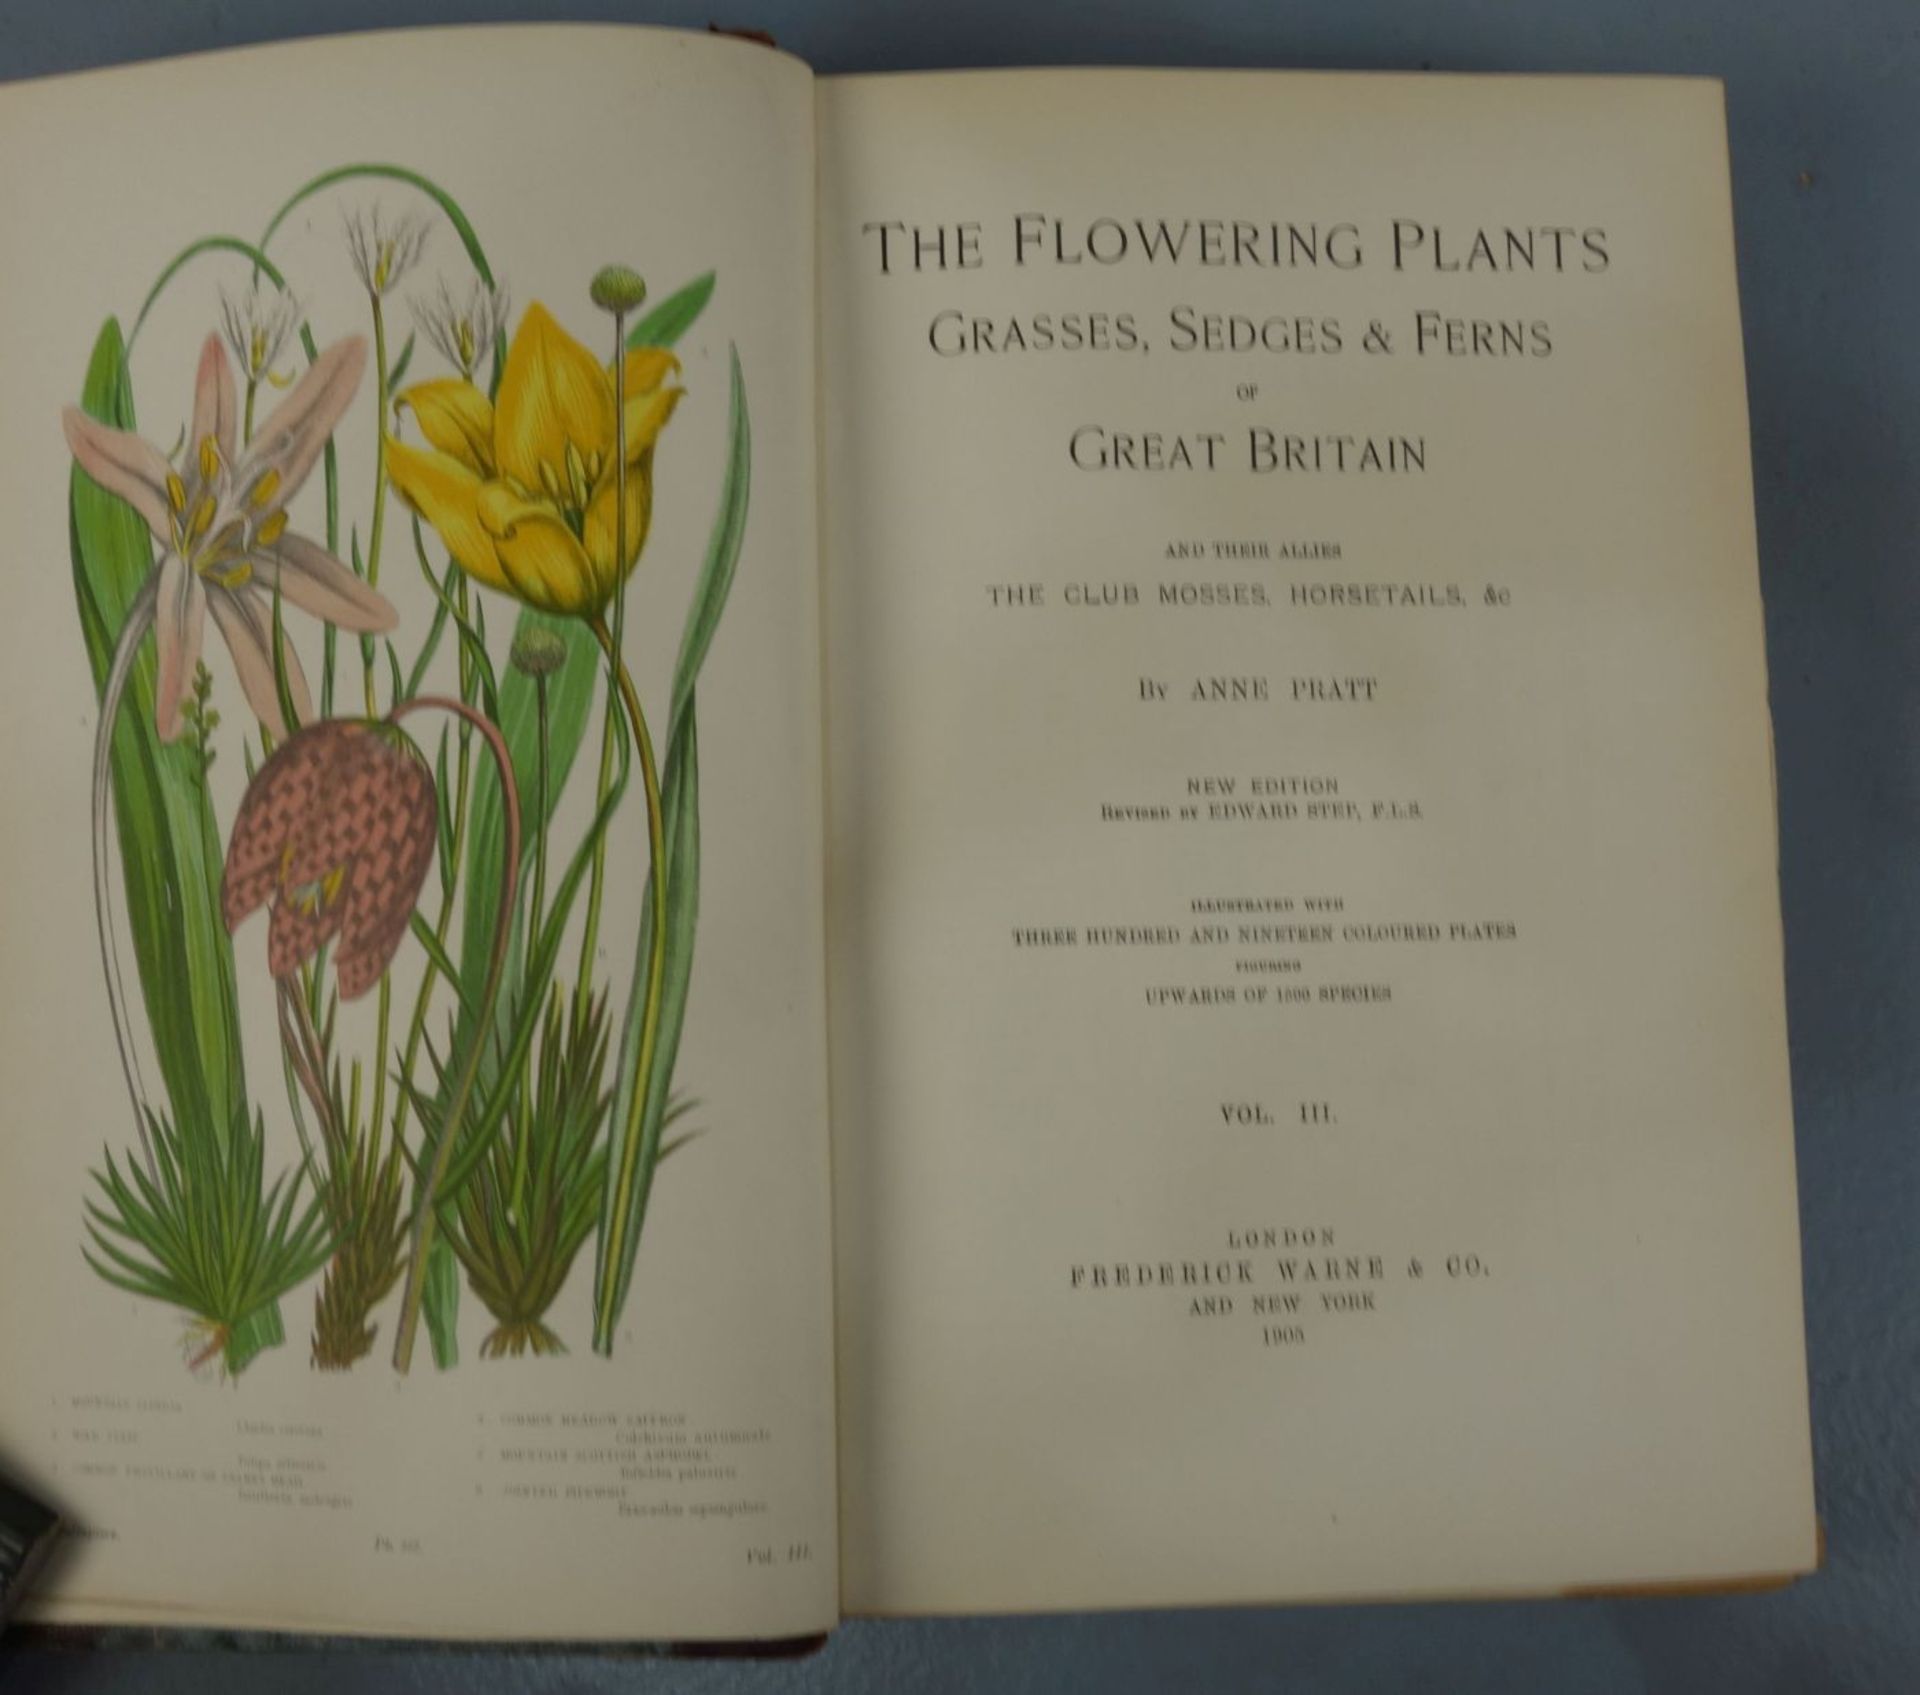 "The Flowering Plants - Grasses, Sedgdes and Ferns of Great Britain" - Image 3 of 3